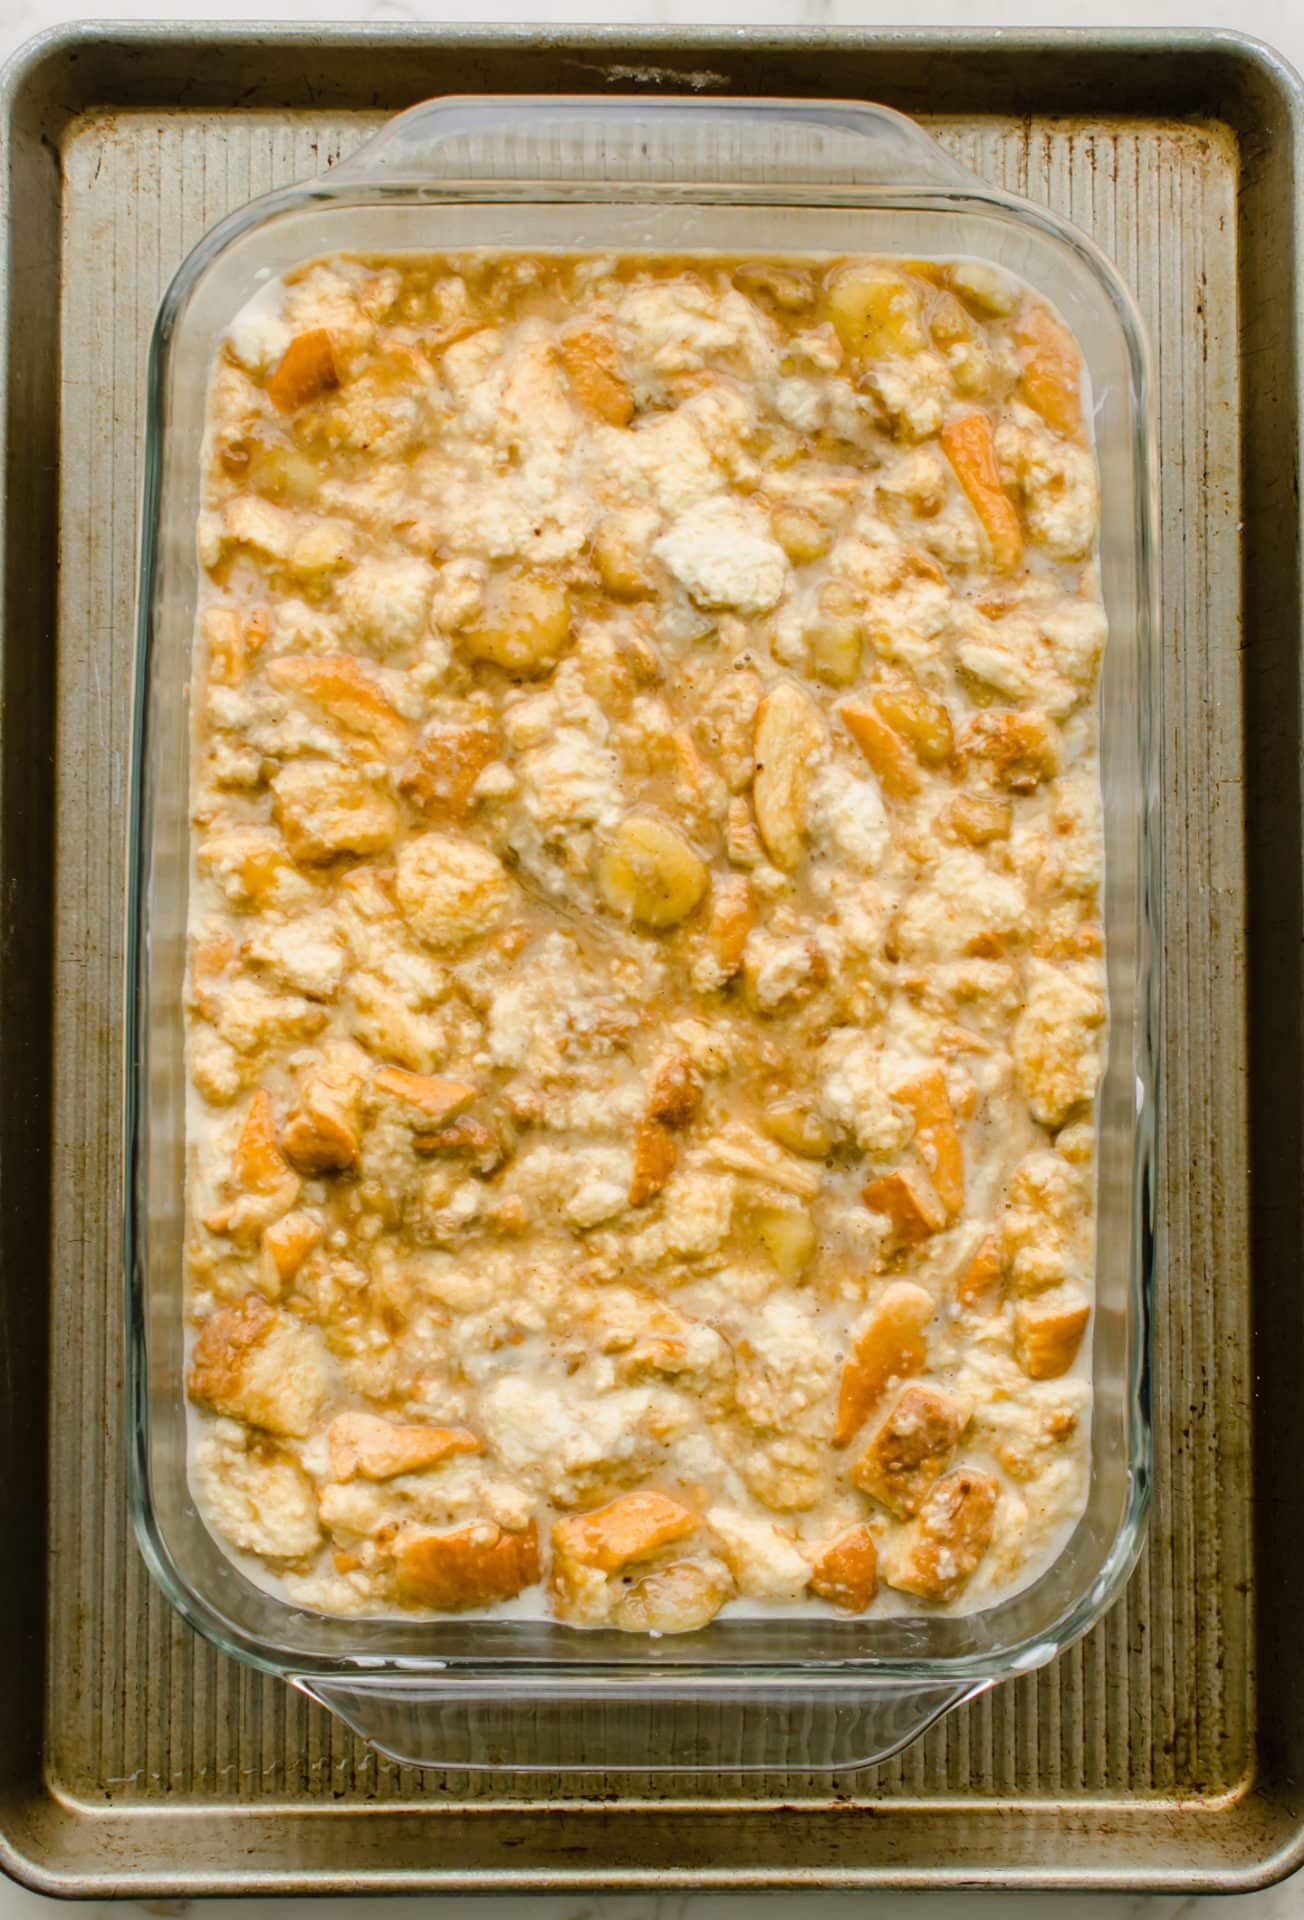 Unbaked bread pudding in a glass baking dish.